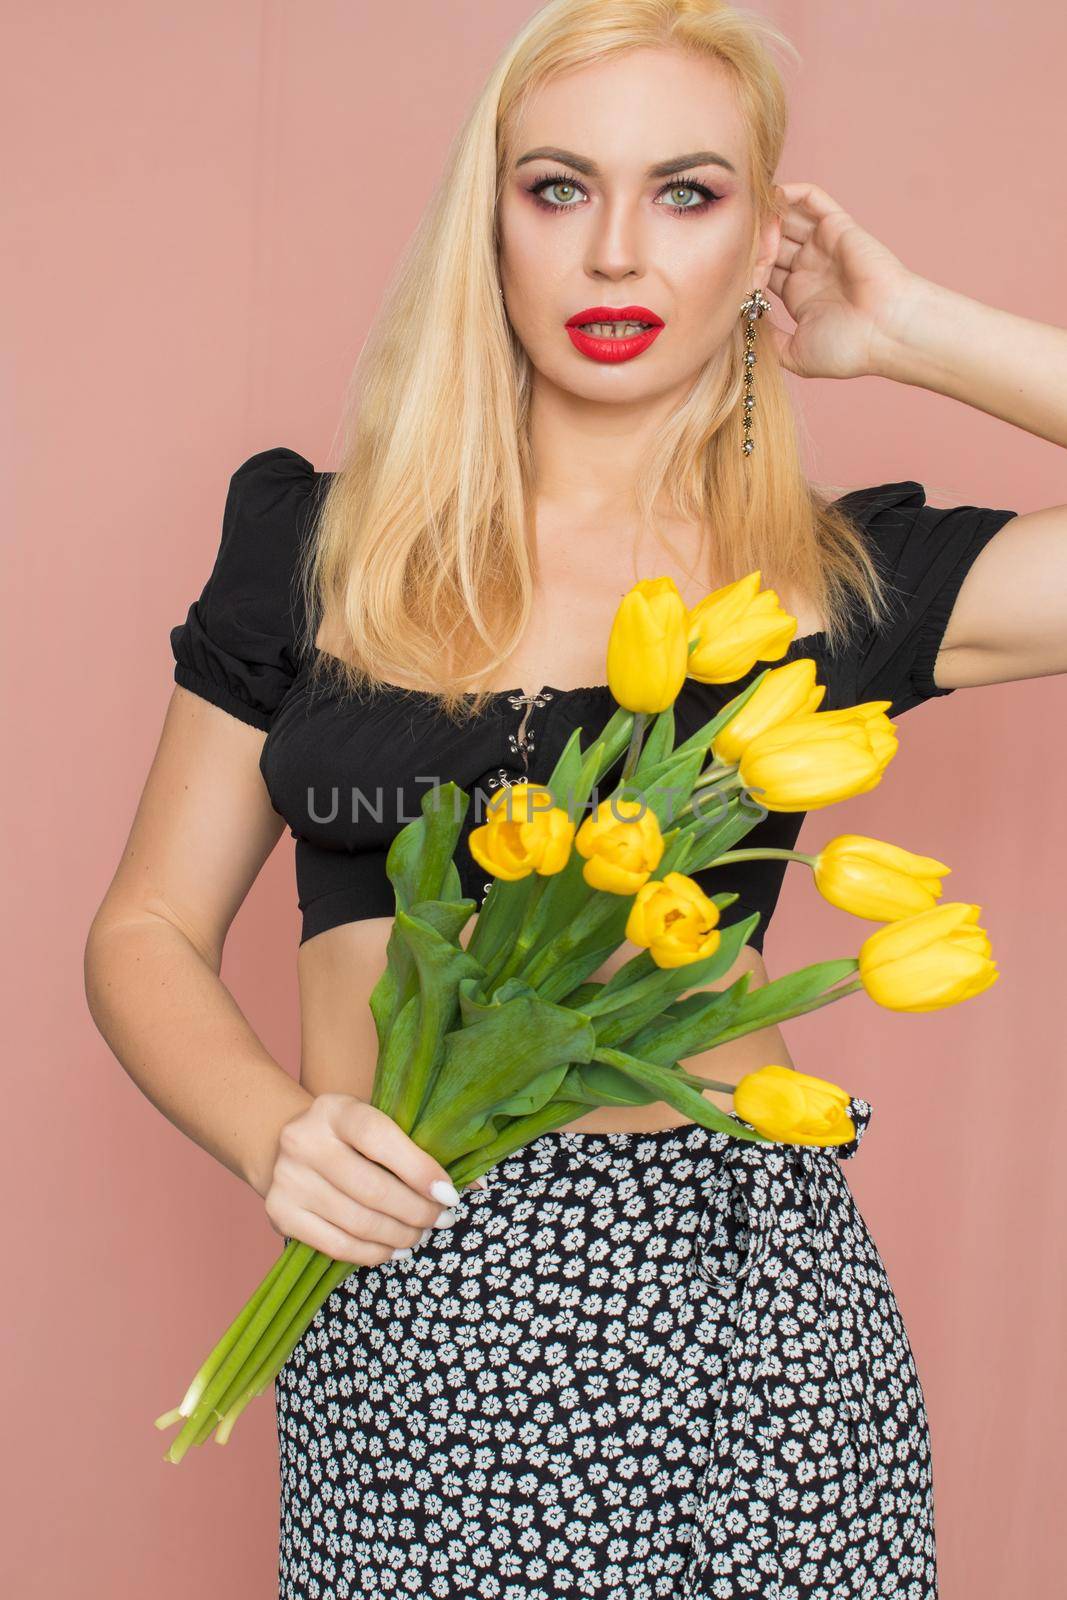 Summer fashion portrait blonde woman. Sexy look in black top and skirt. Red lips. Holding yellow tulips in her hands